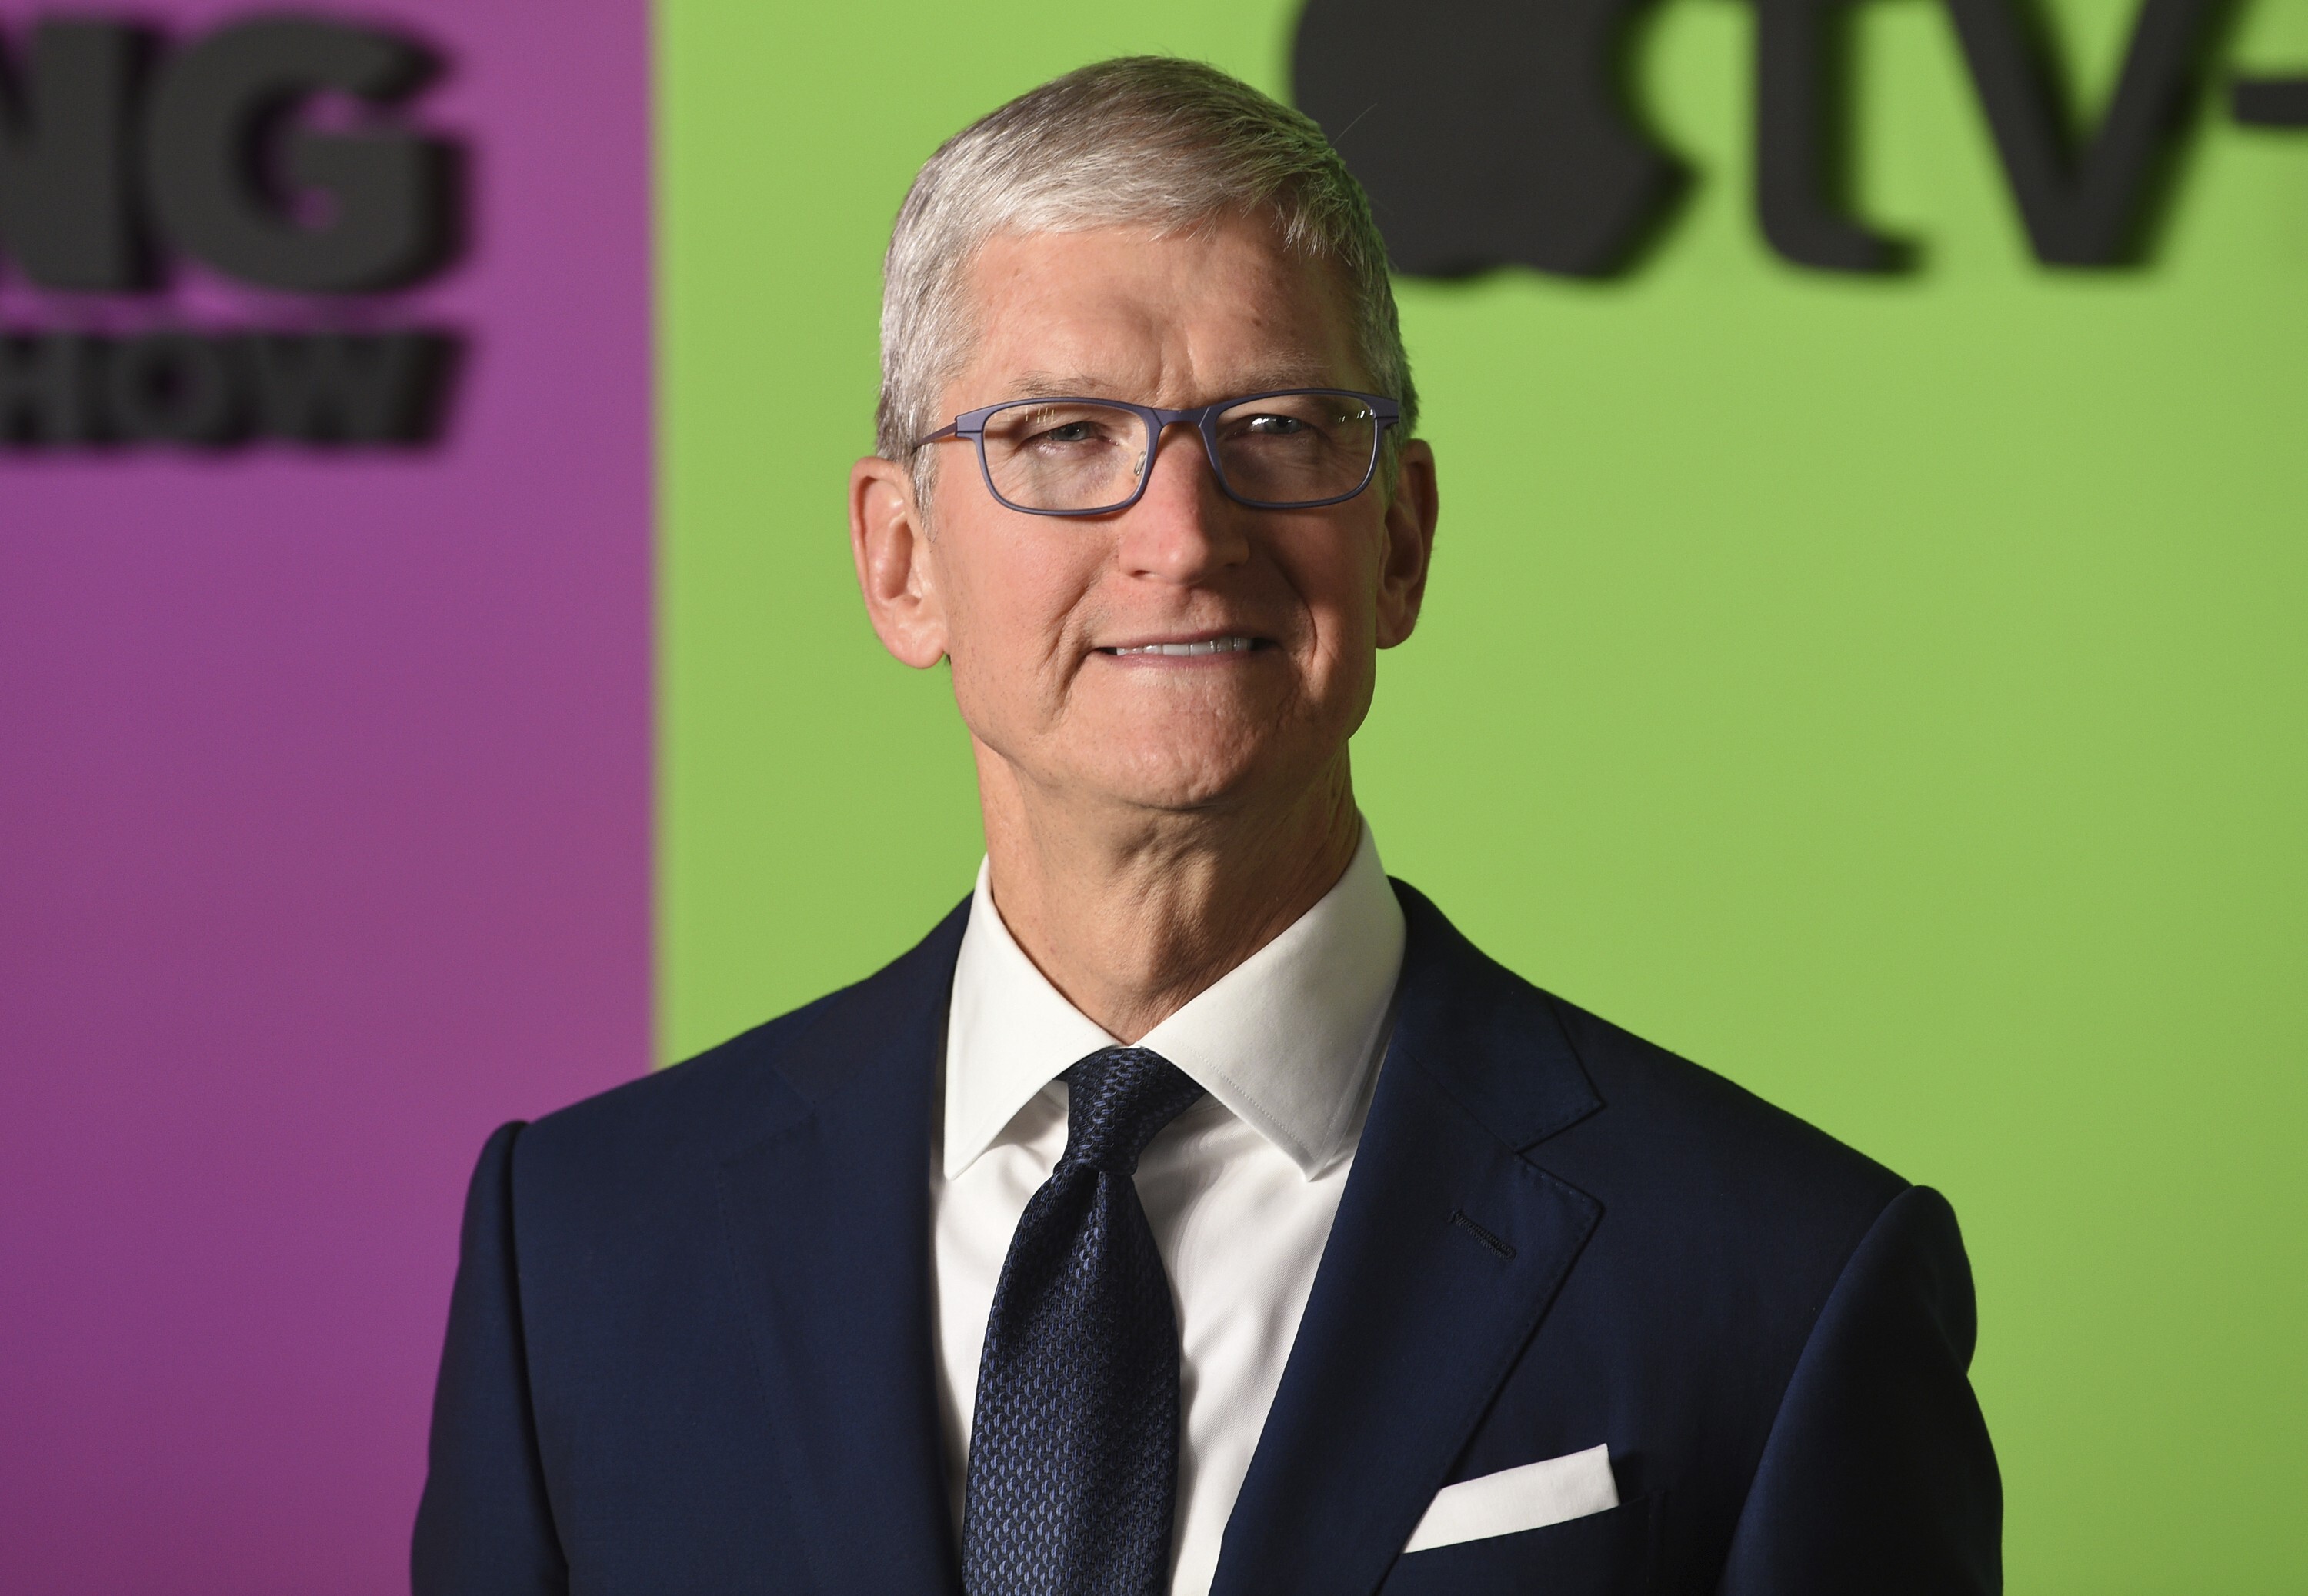 Apple CEO Tim Cook attends an event in New York in October 2019. Photo: AP